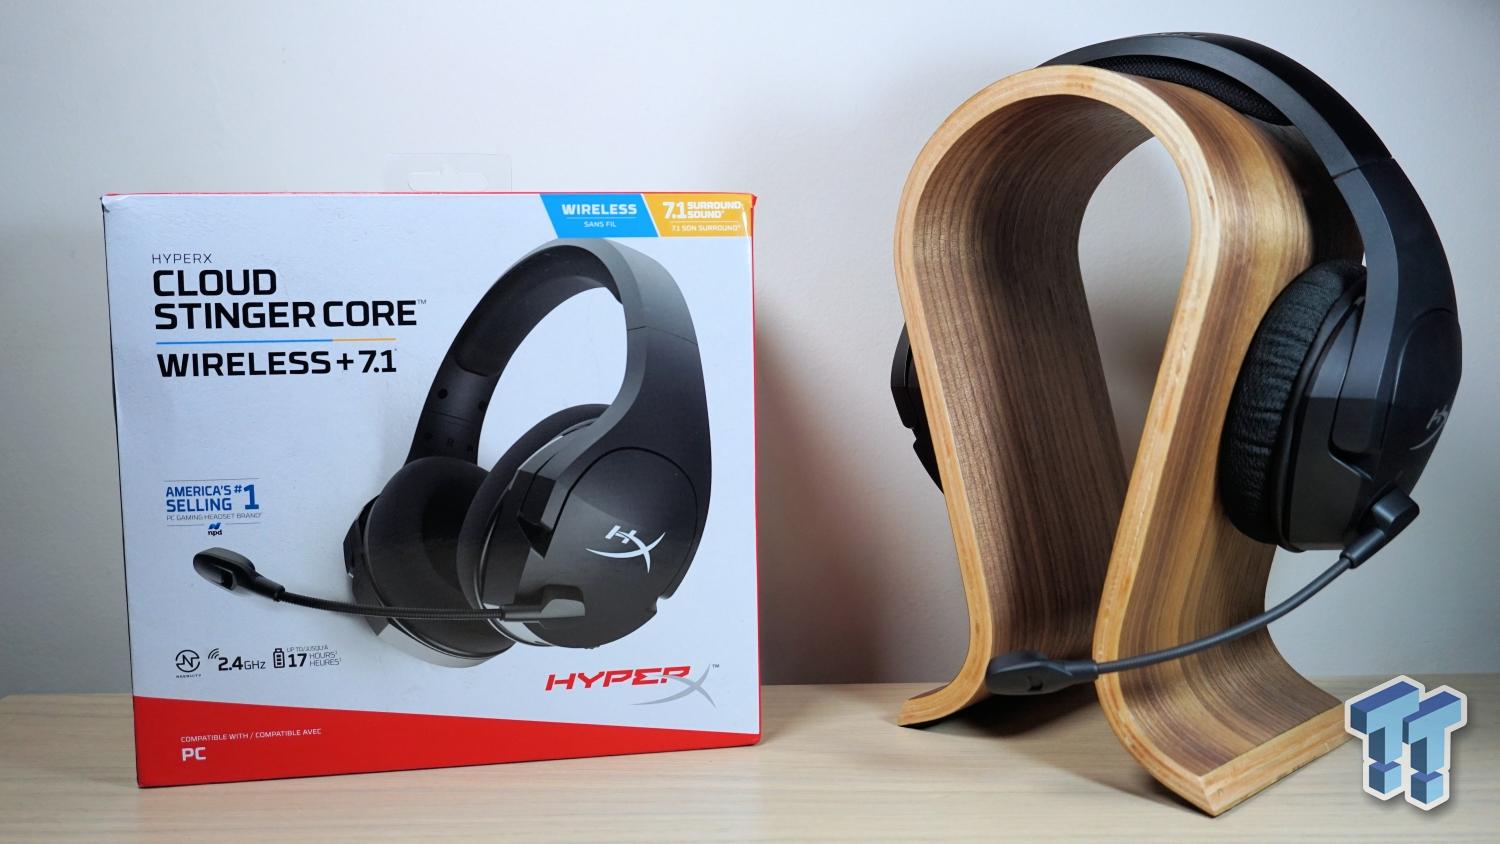 HyperX Cloud Stinger Core Wireless 7.1 Gaming Headset Review